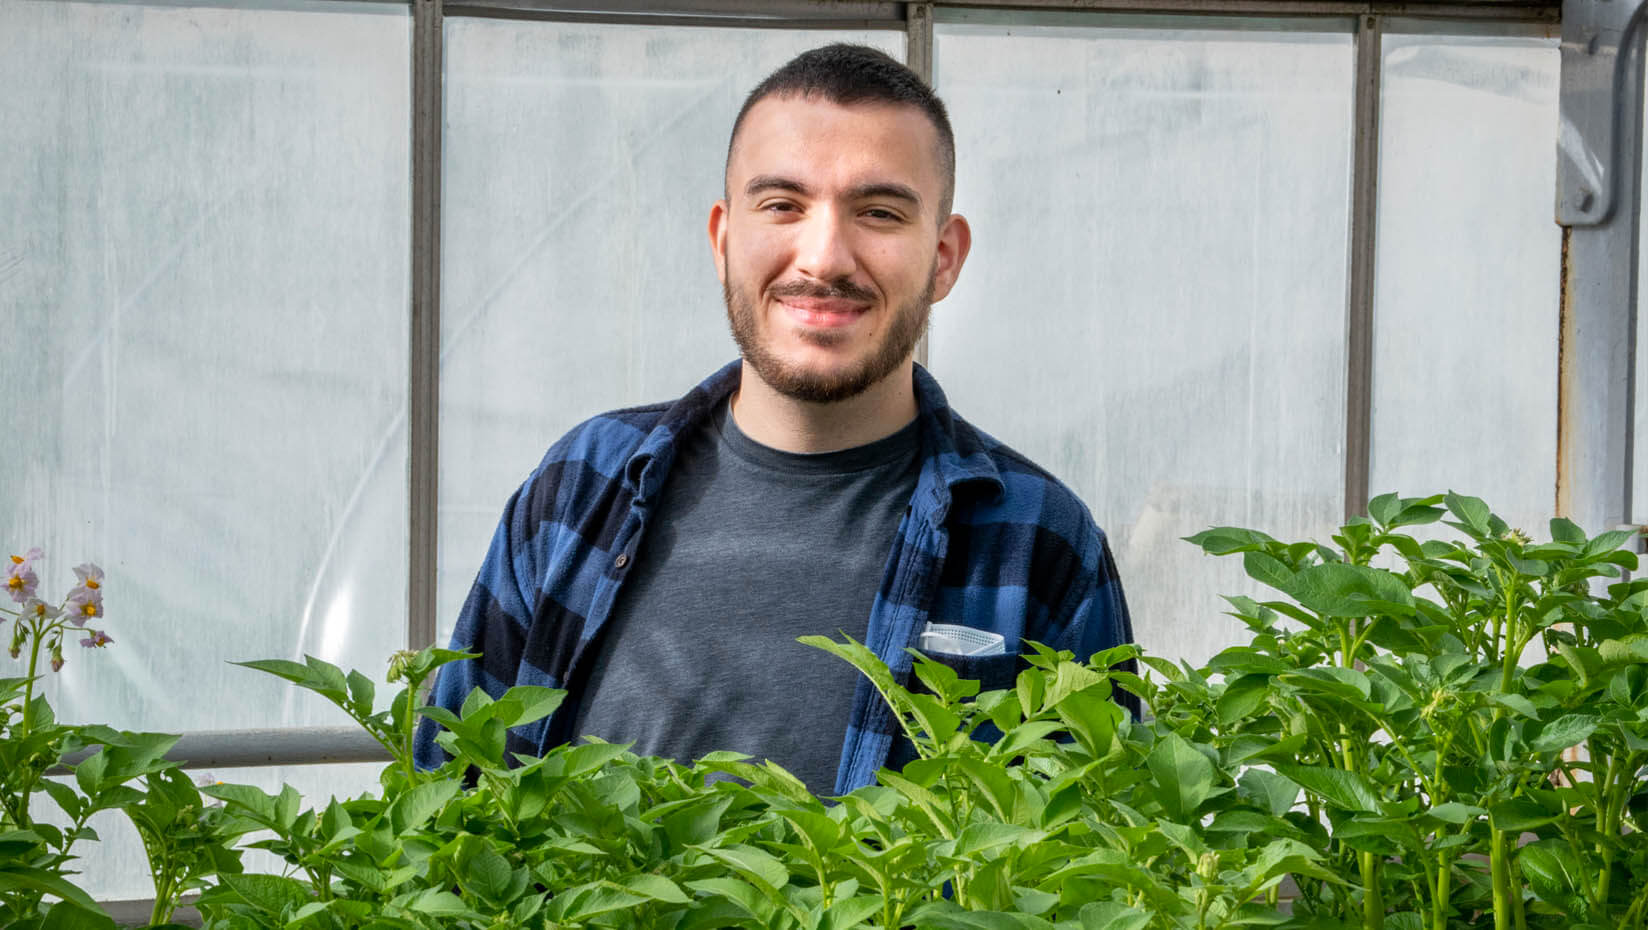 Ross Sousa posing with plants in a greenhouse